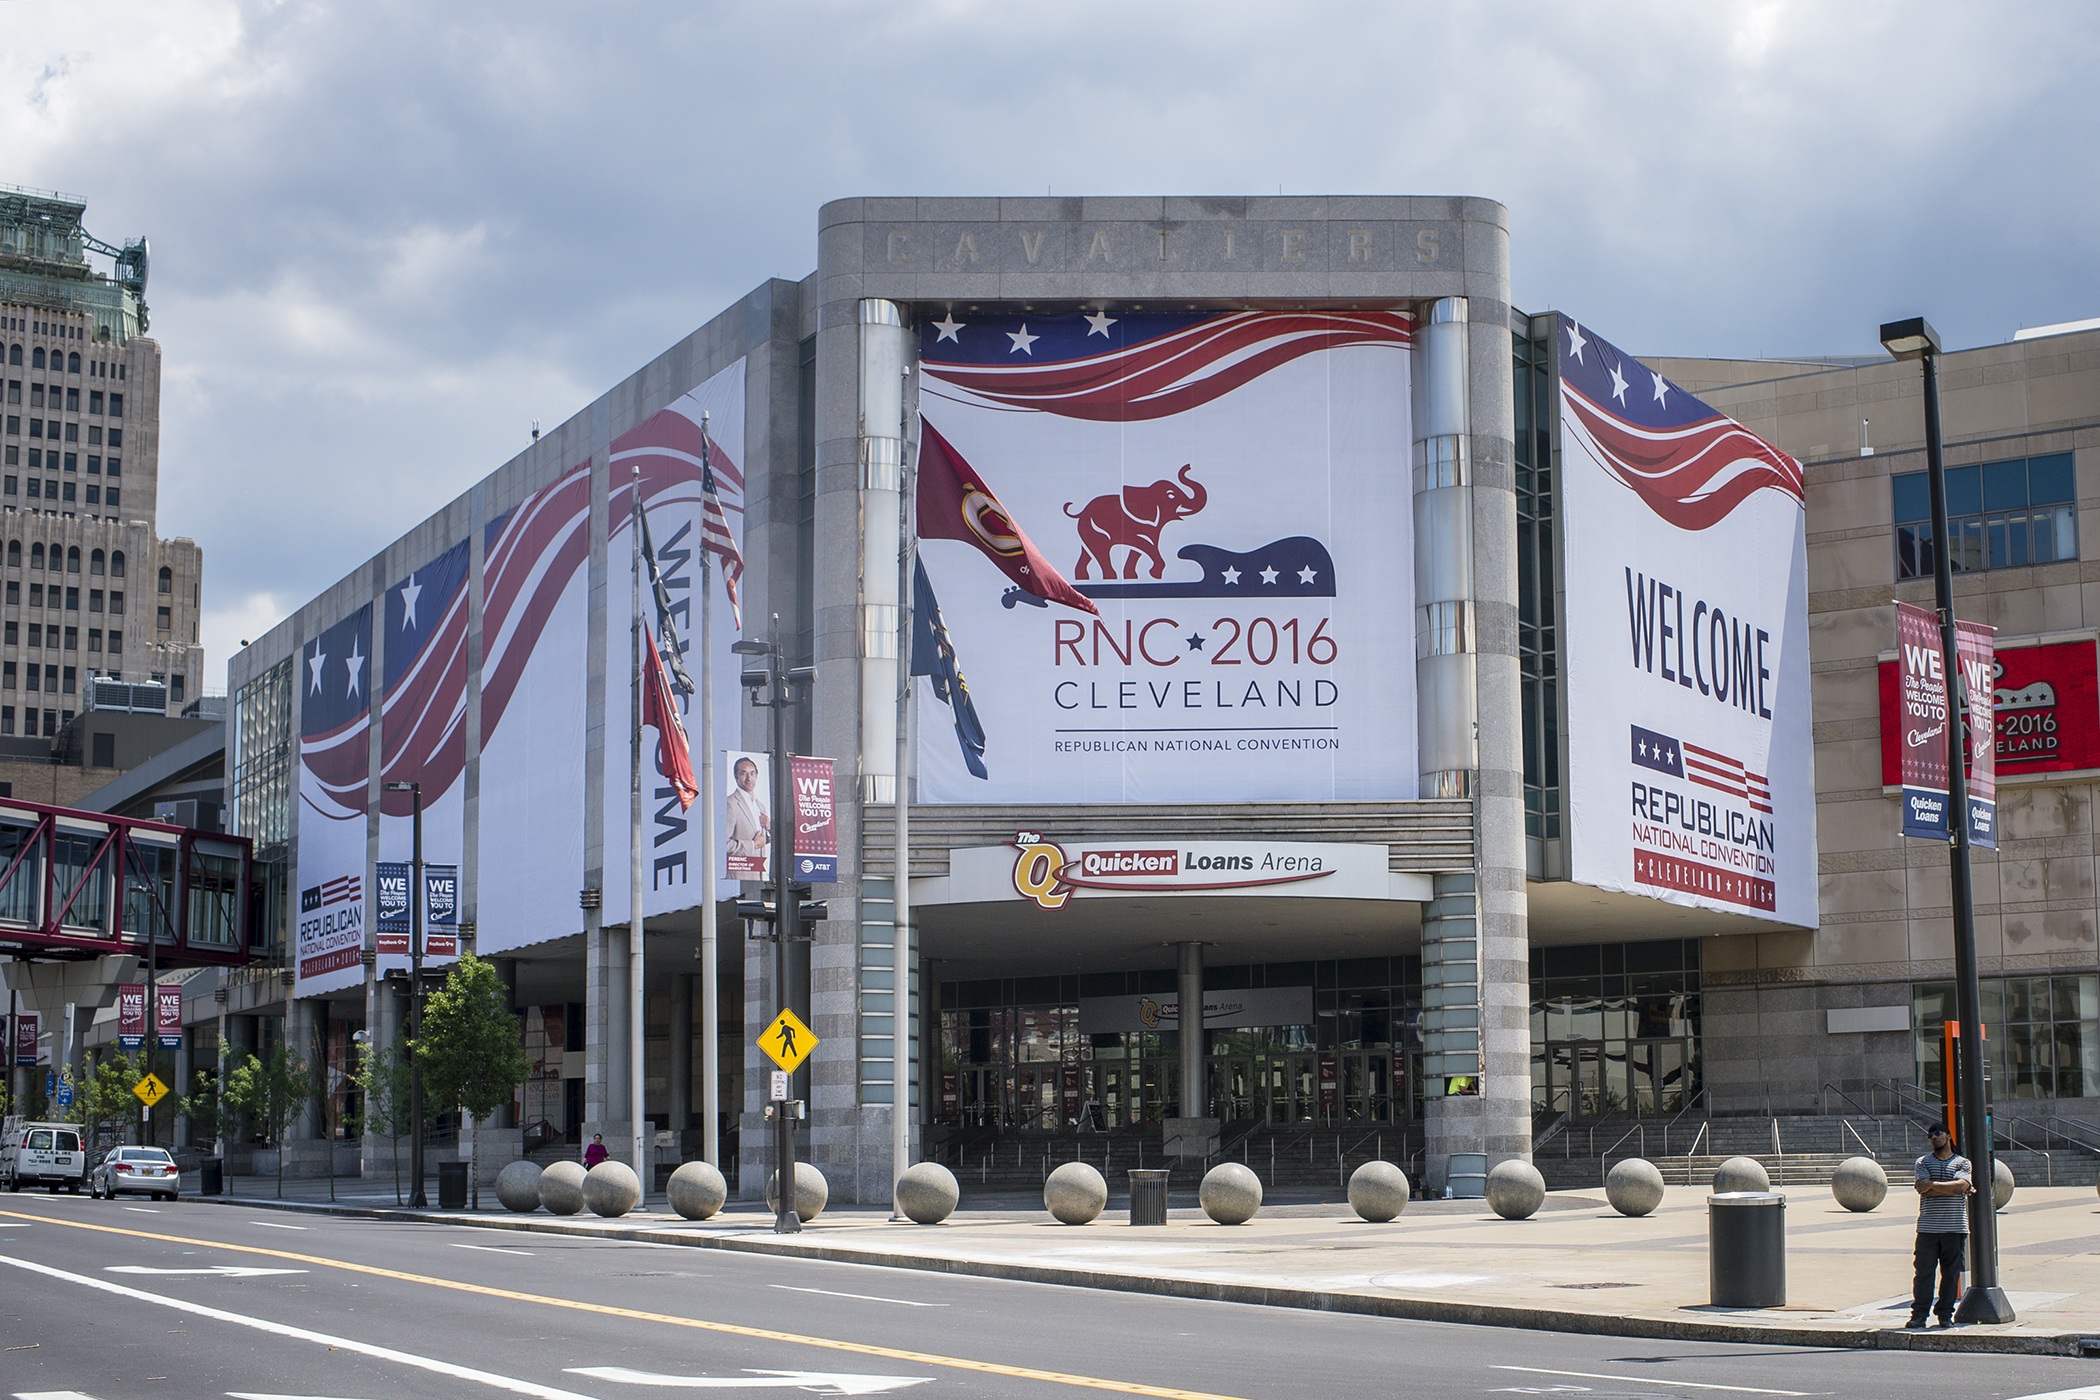 Quicken Loans Arena is decorated to welcome the Republican National Convention on July 11, 2016 in Cleveland, Ohio. The convention will be held at the arena July 18-21, 2016.